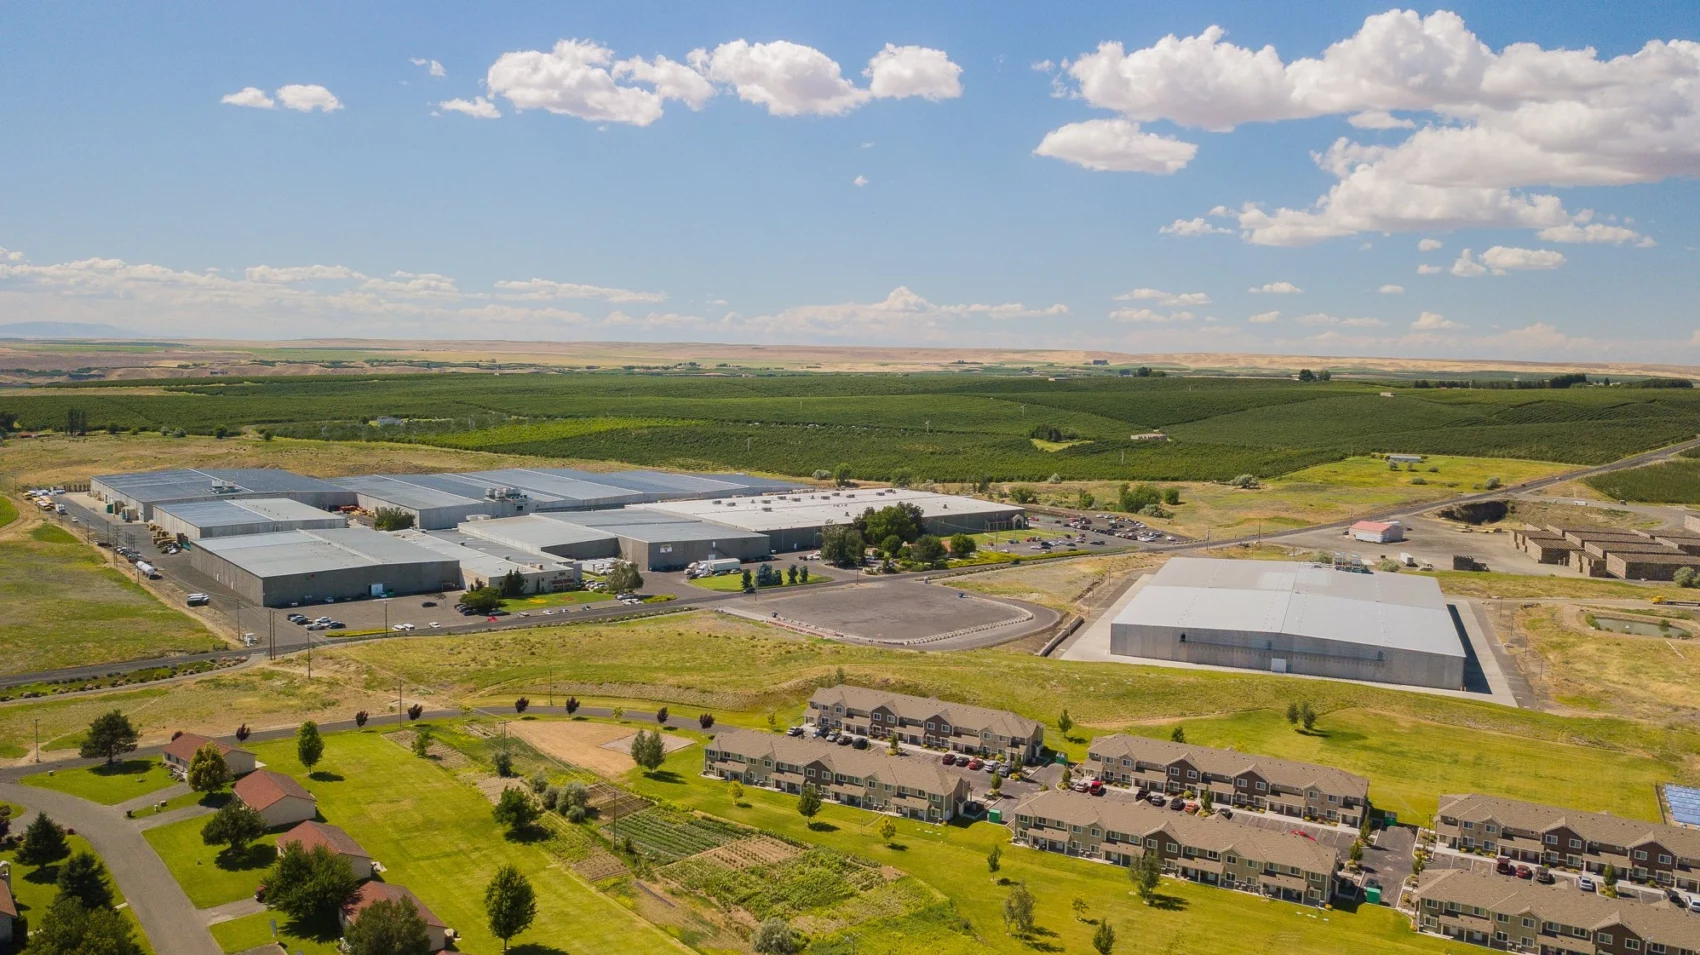 Apple packing facility and the surrounding landscape